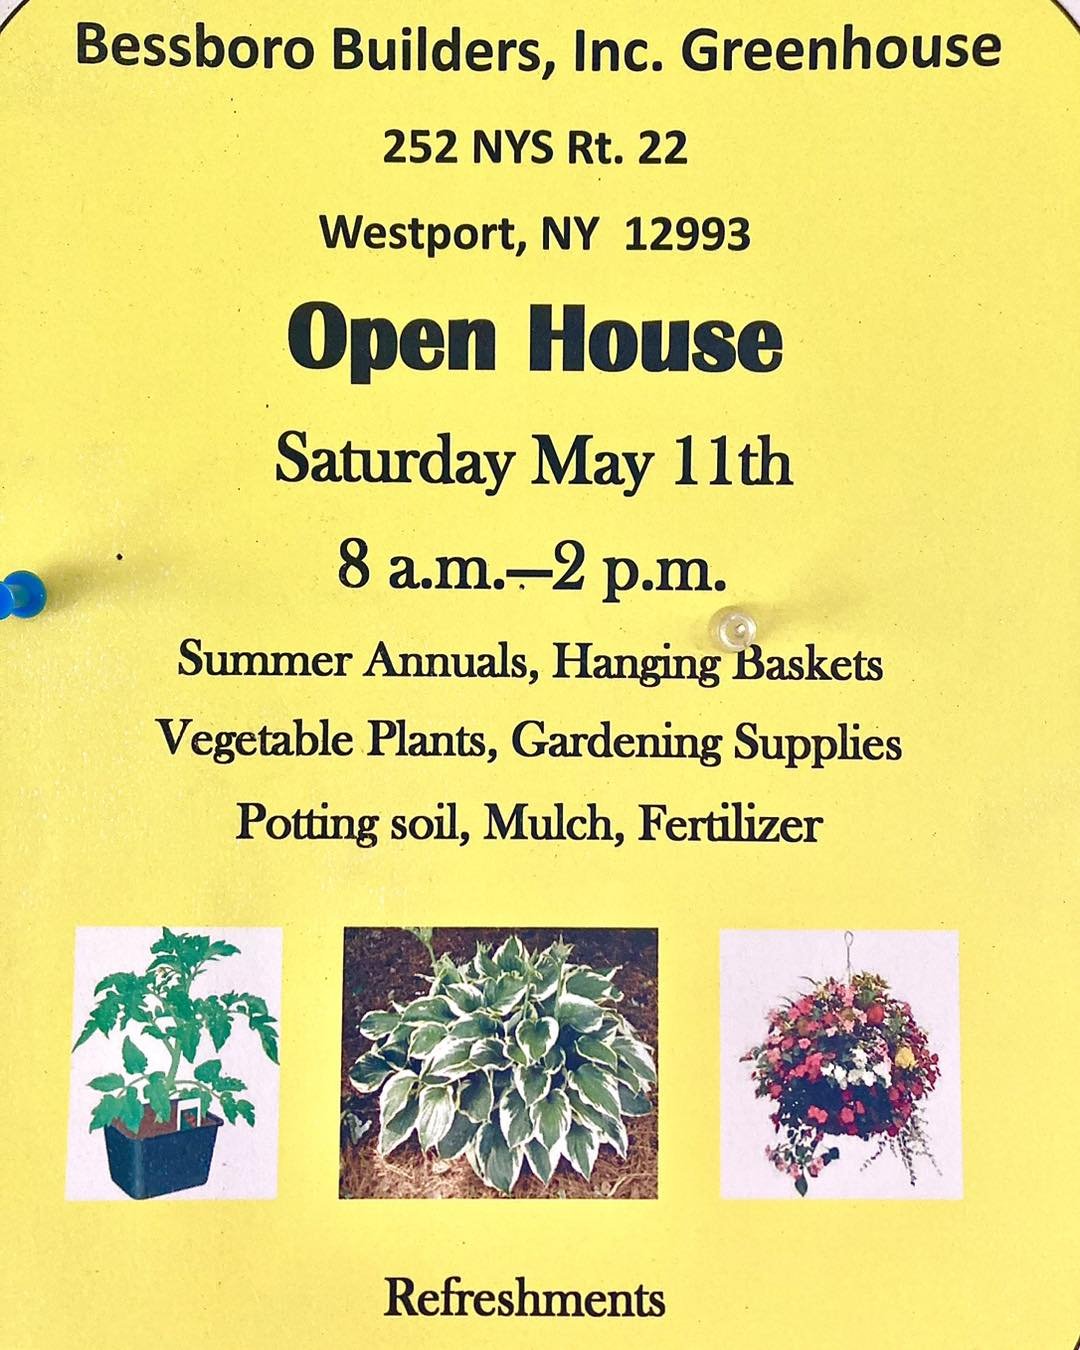 Come find everything you need to start your growing season at Bessboro Builders' open house this Saturday!